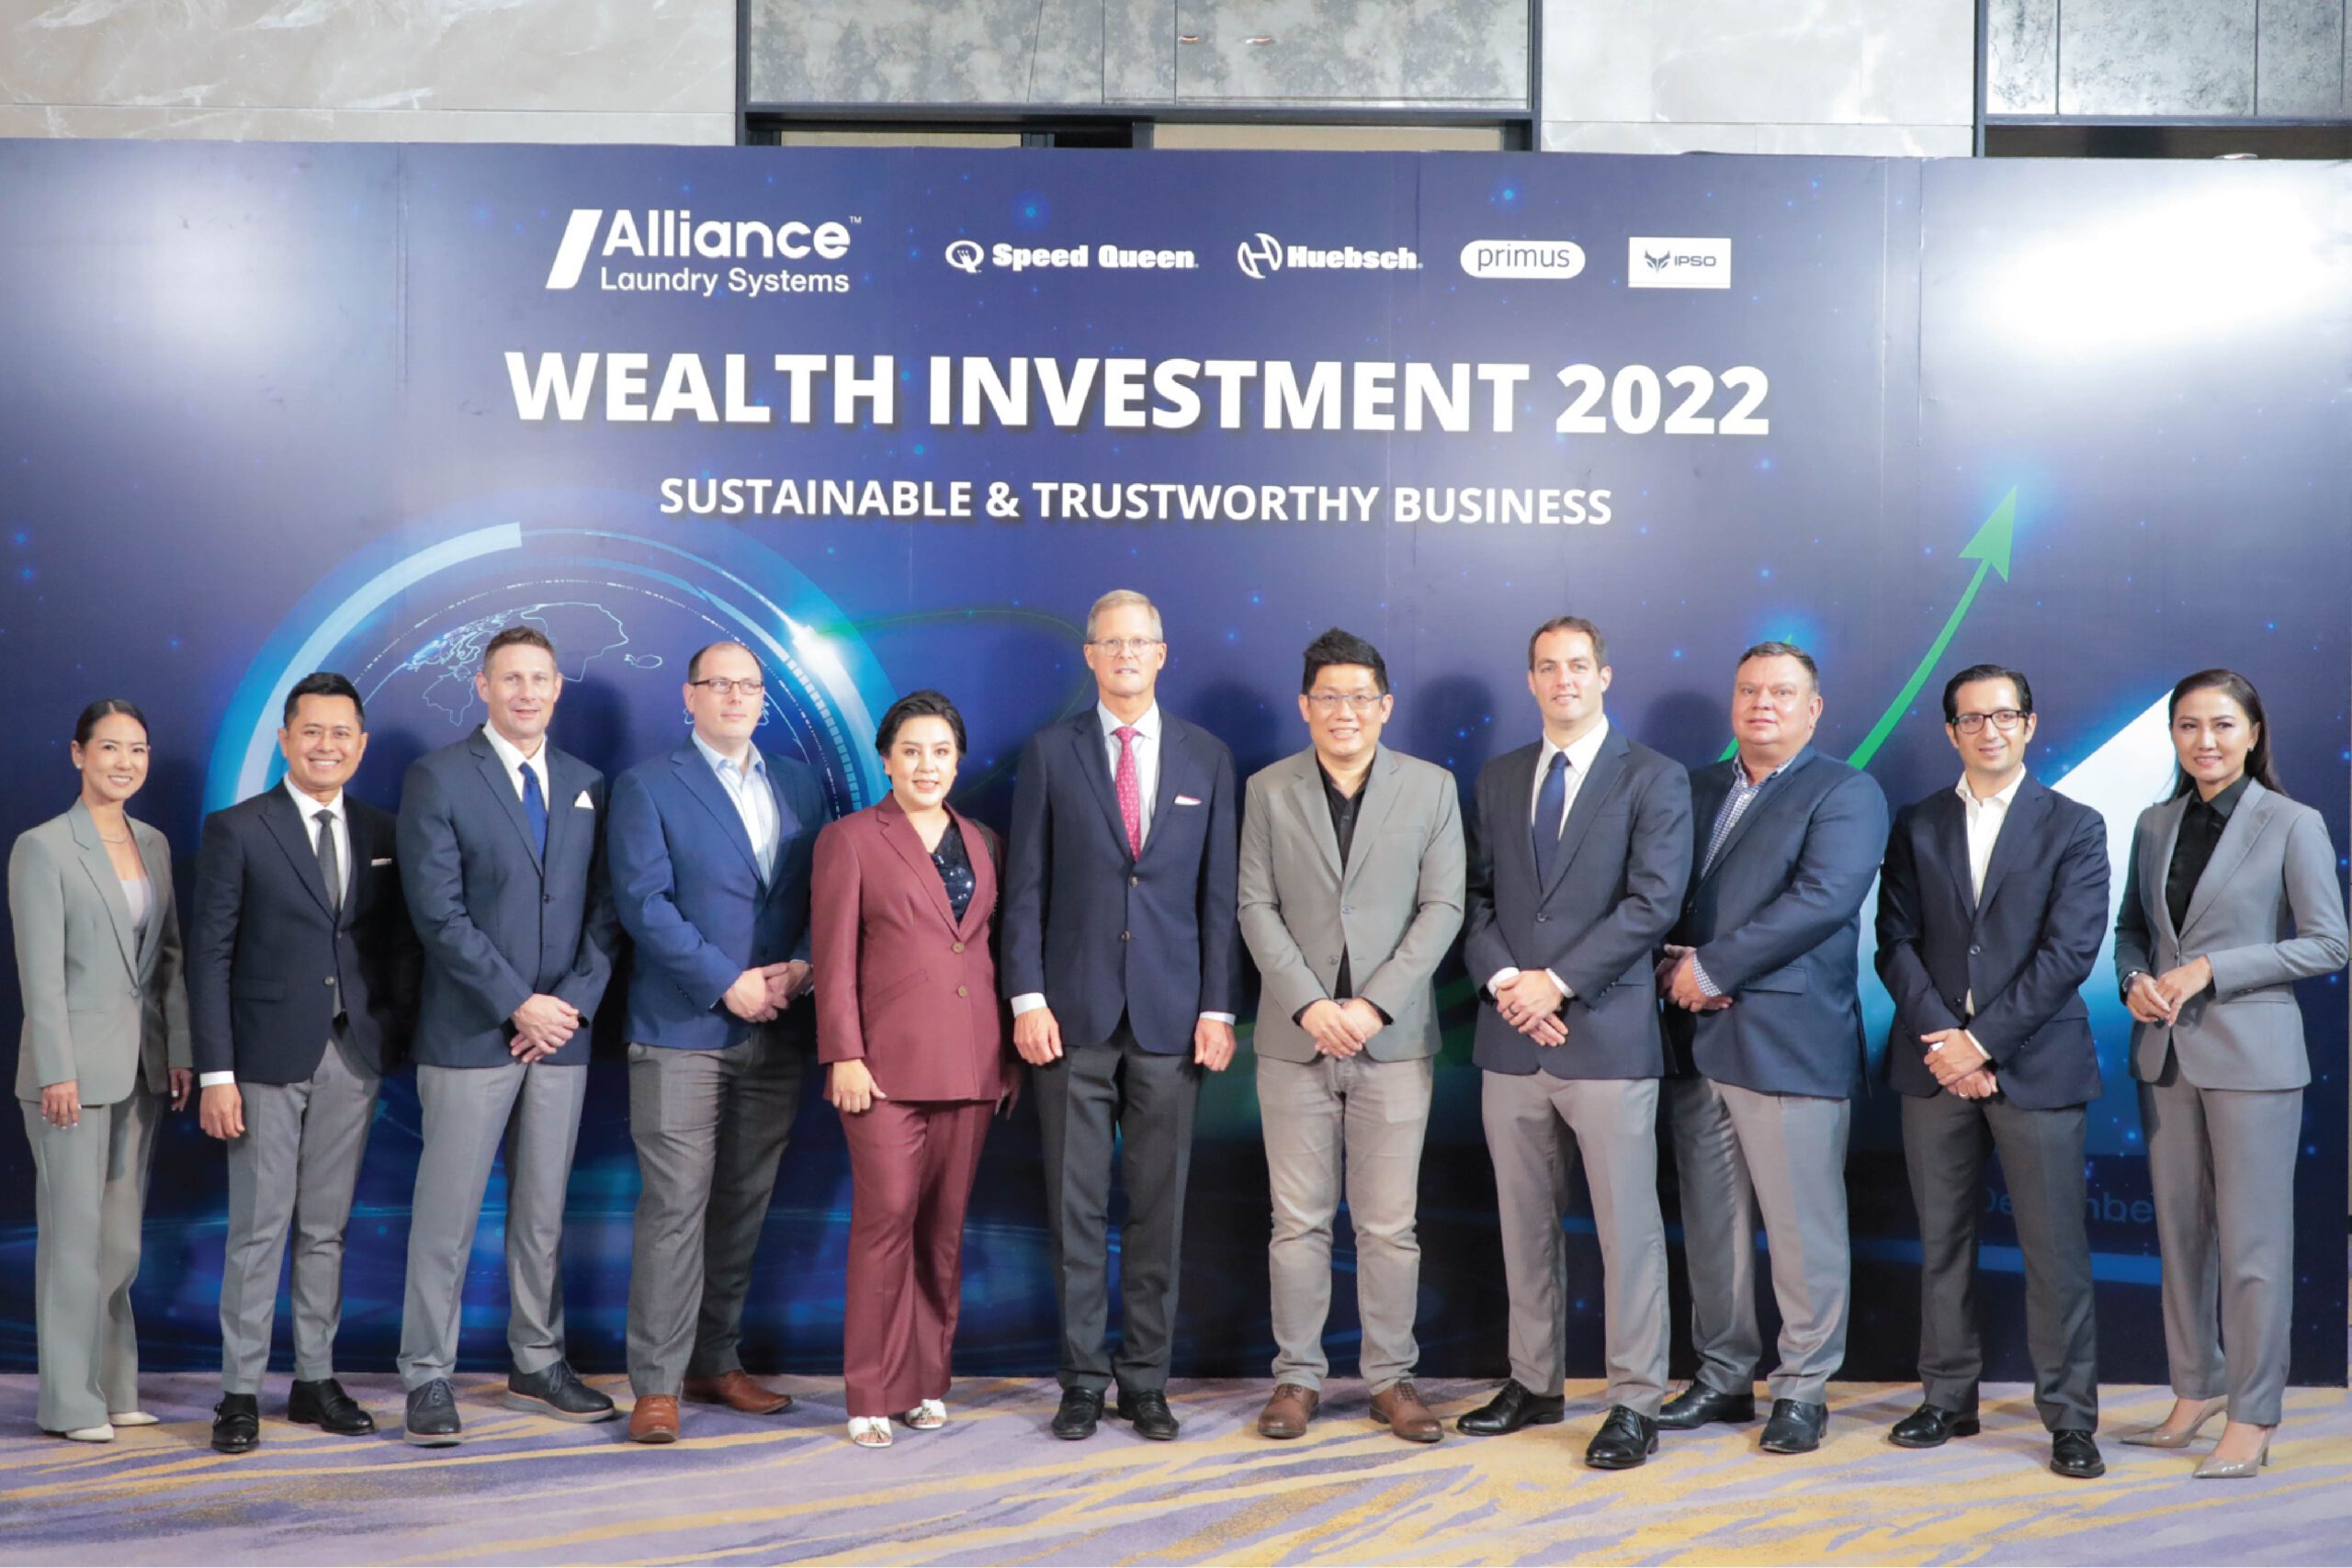 Seven Men with Navy Blue Suit and one man with grey suit and two women with grey suit and one woman with red suit they stand from of Board Alliance Wealth Investment 2022